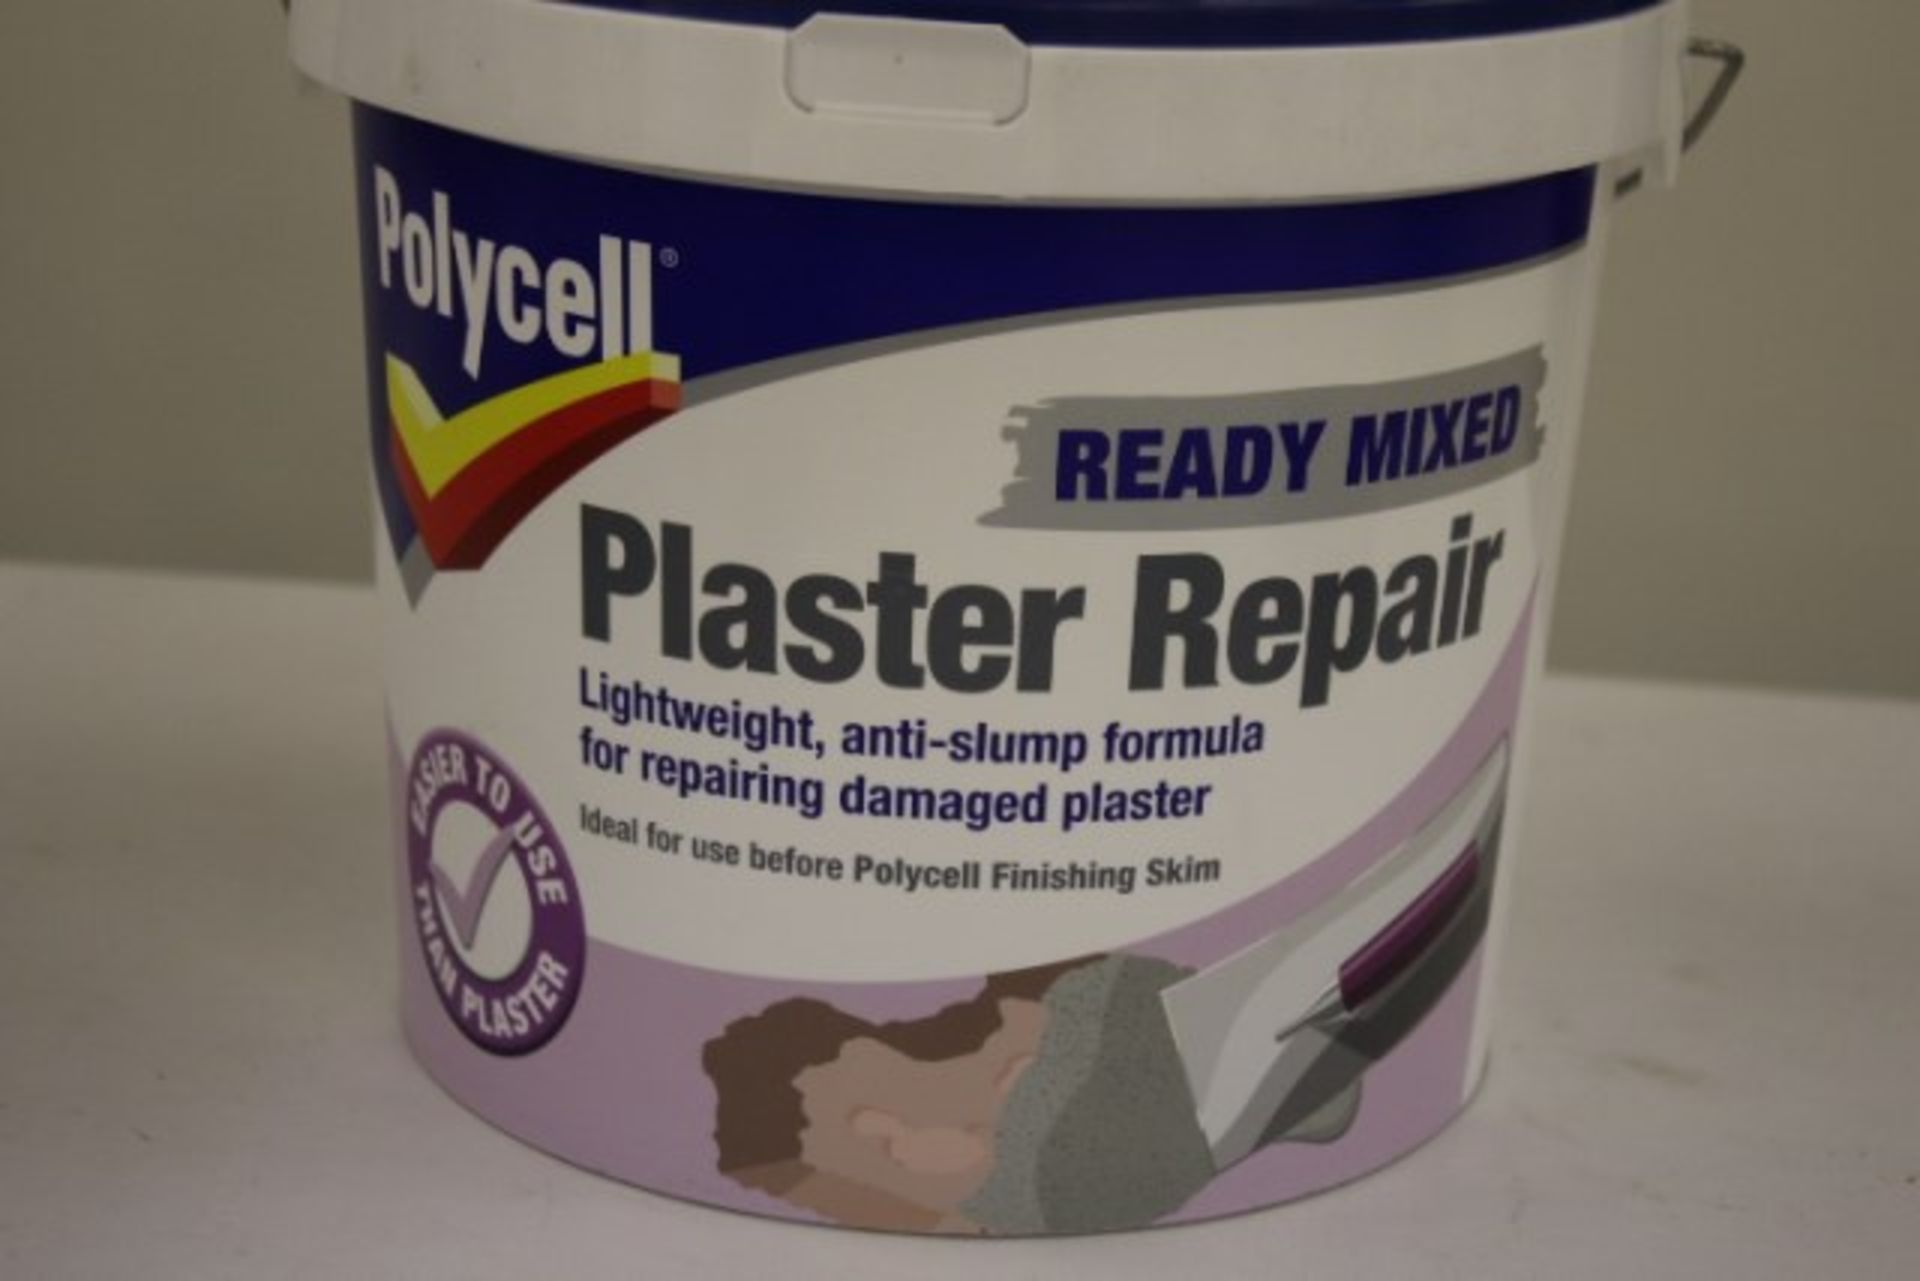 V Grade A Polycell Ready Mixed Plaster Repair 6 litre - Image 2 of 3